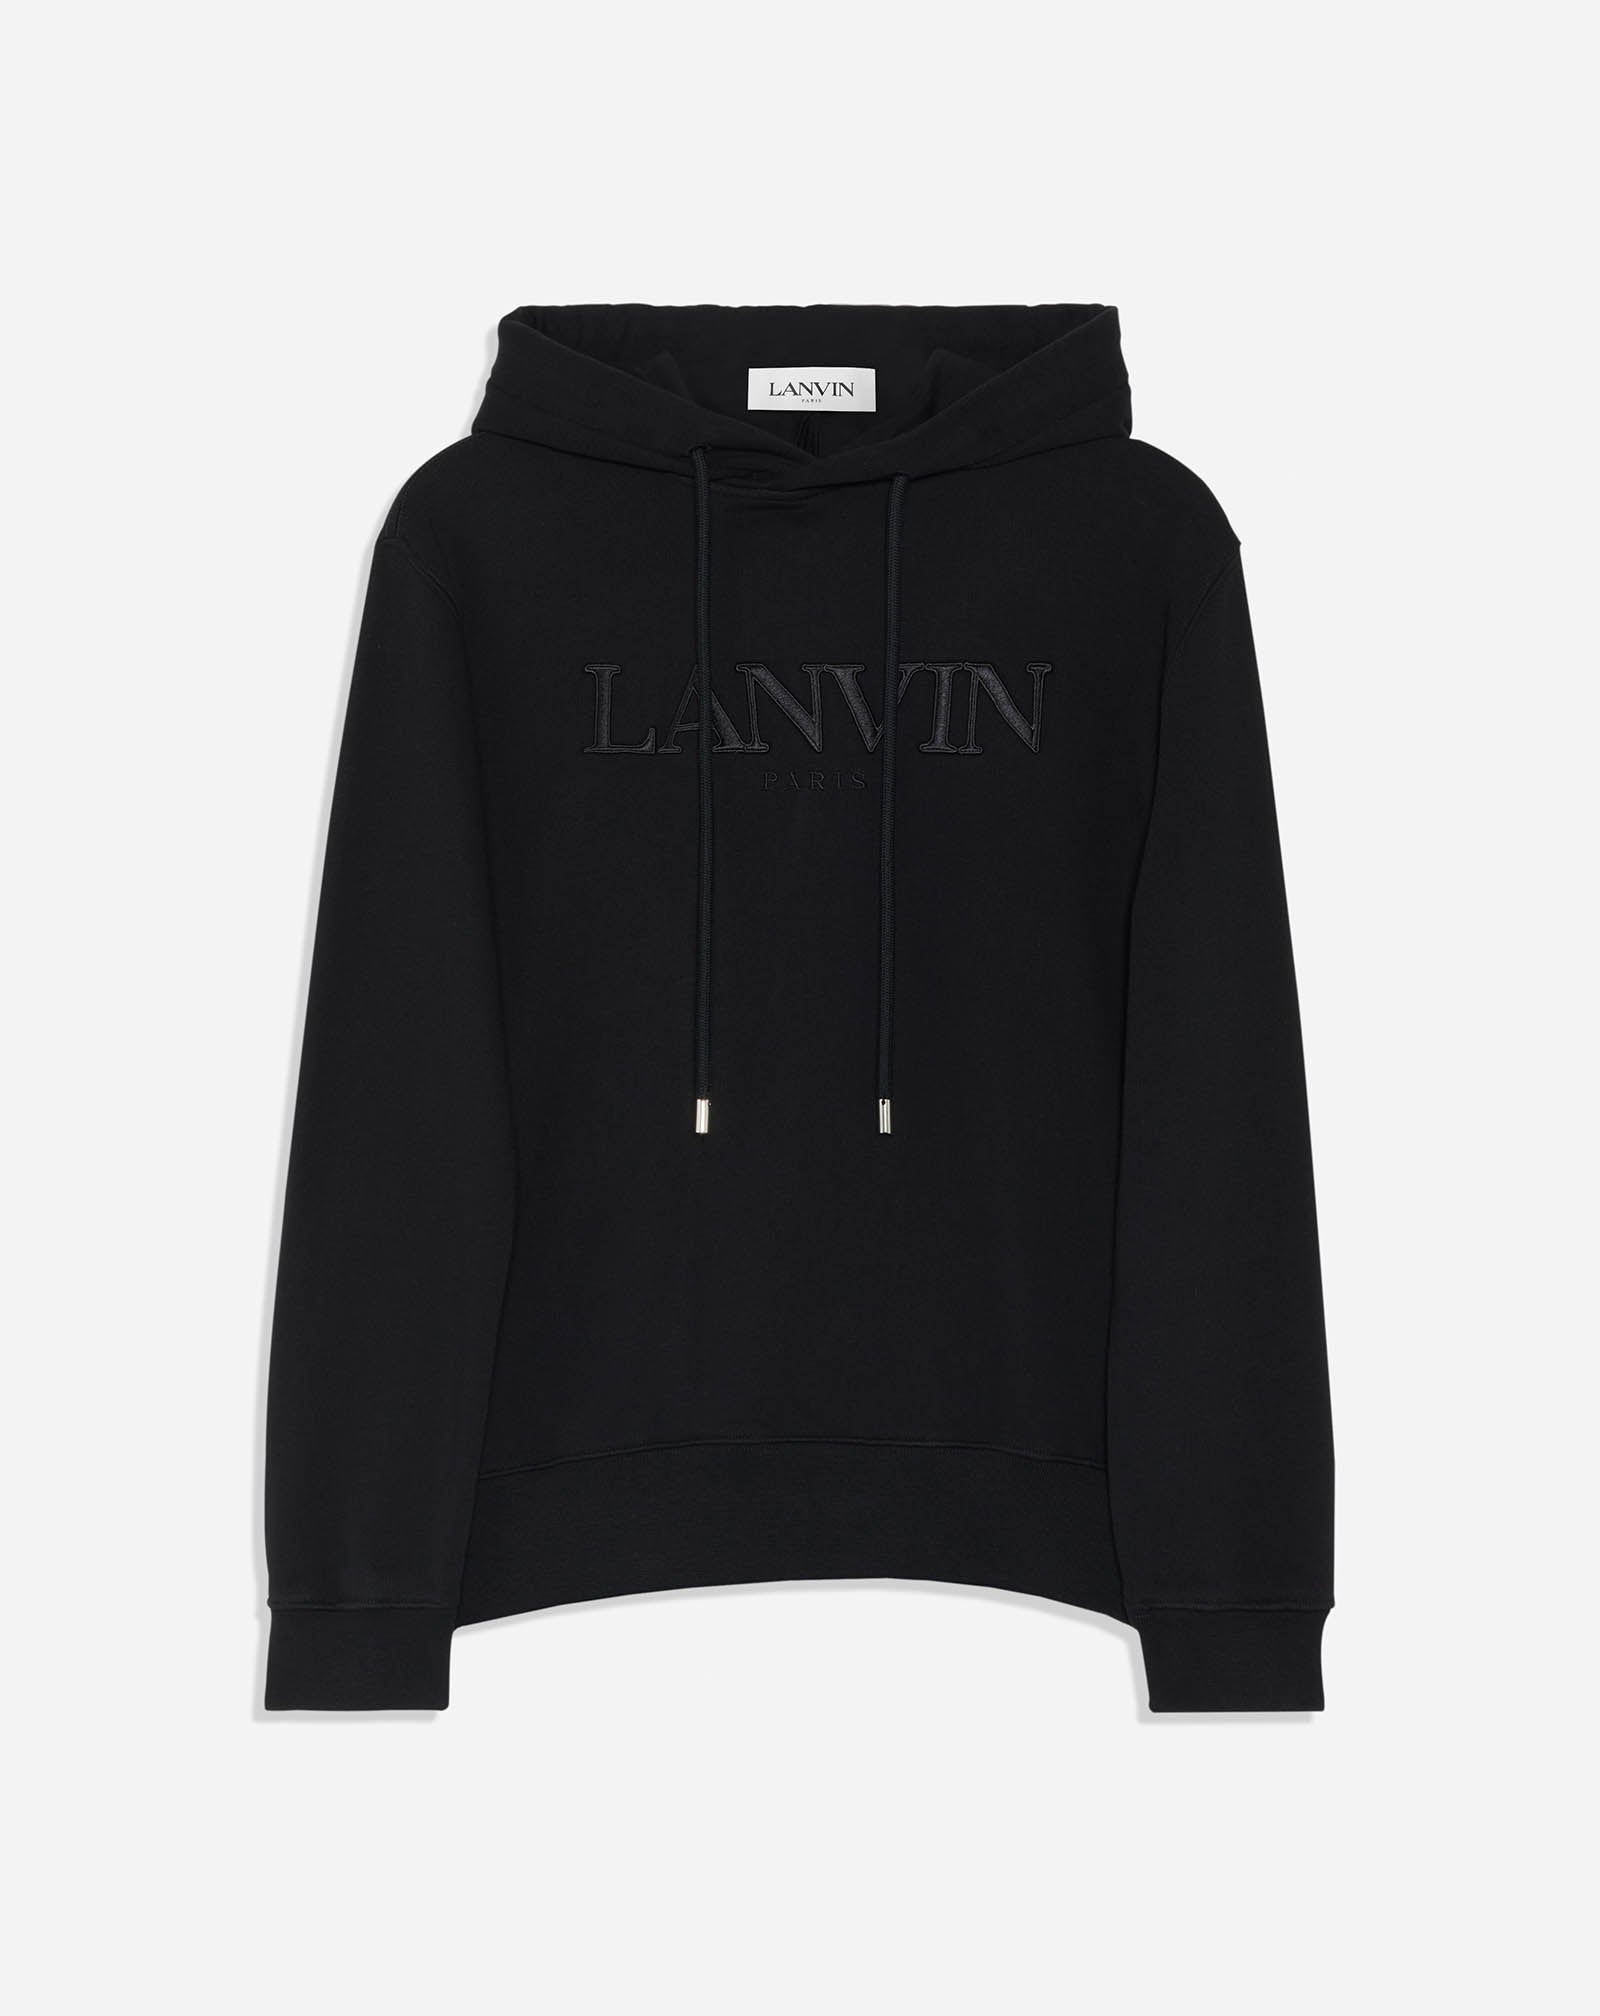 LANVIN PARIS EMBROIDERED HOODED SWEATER - 1